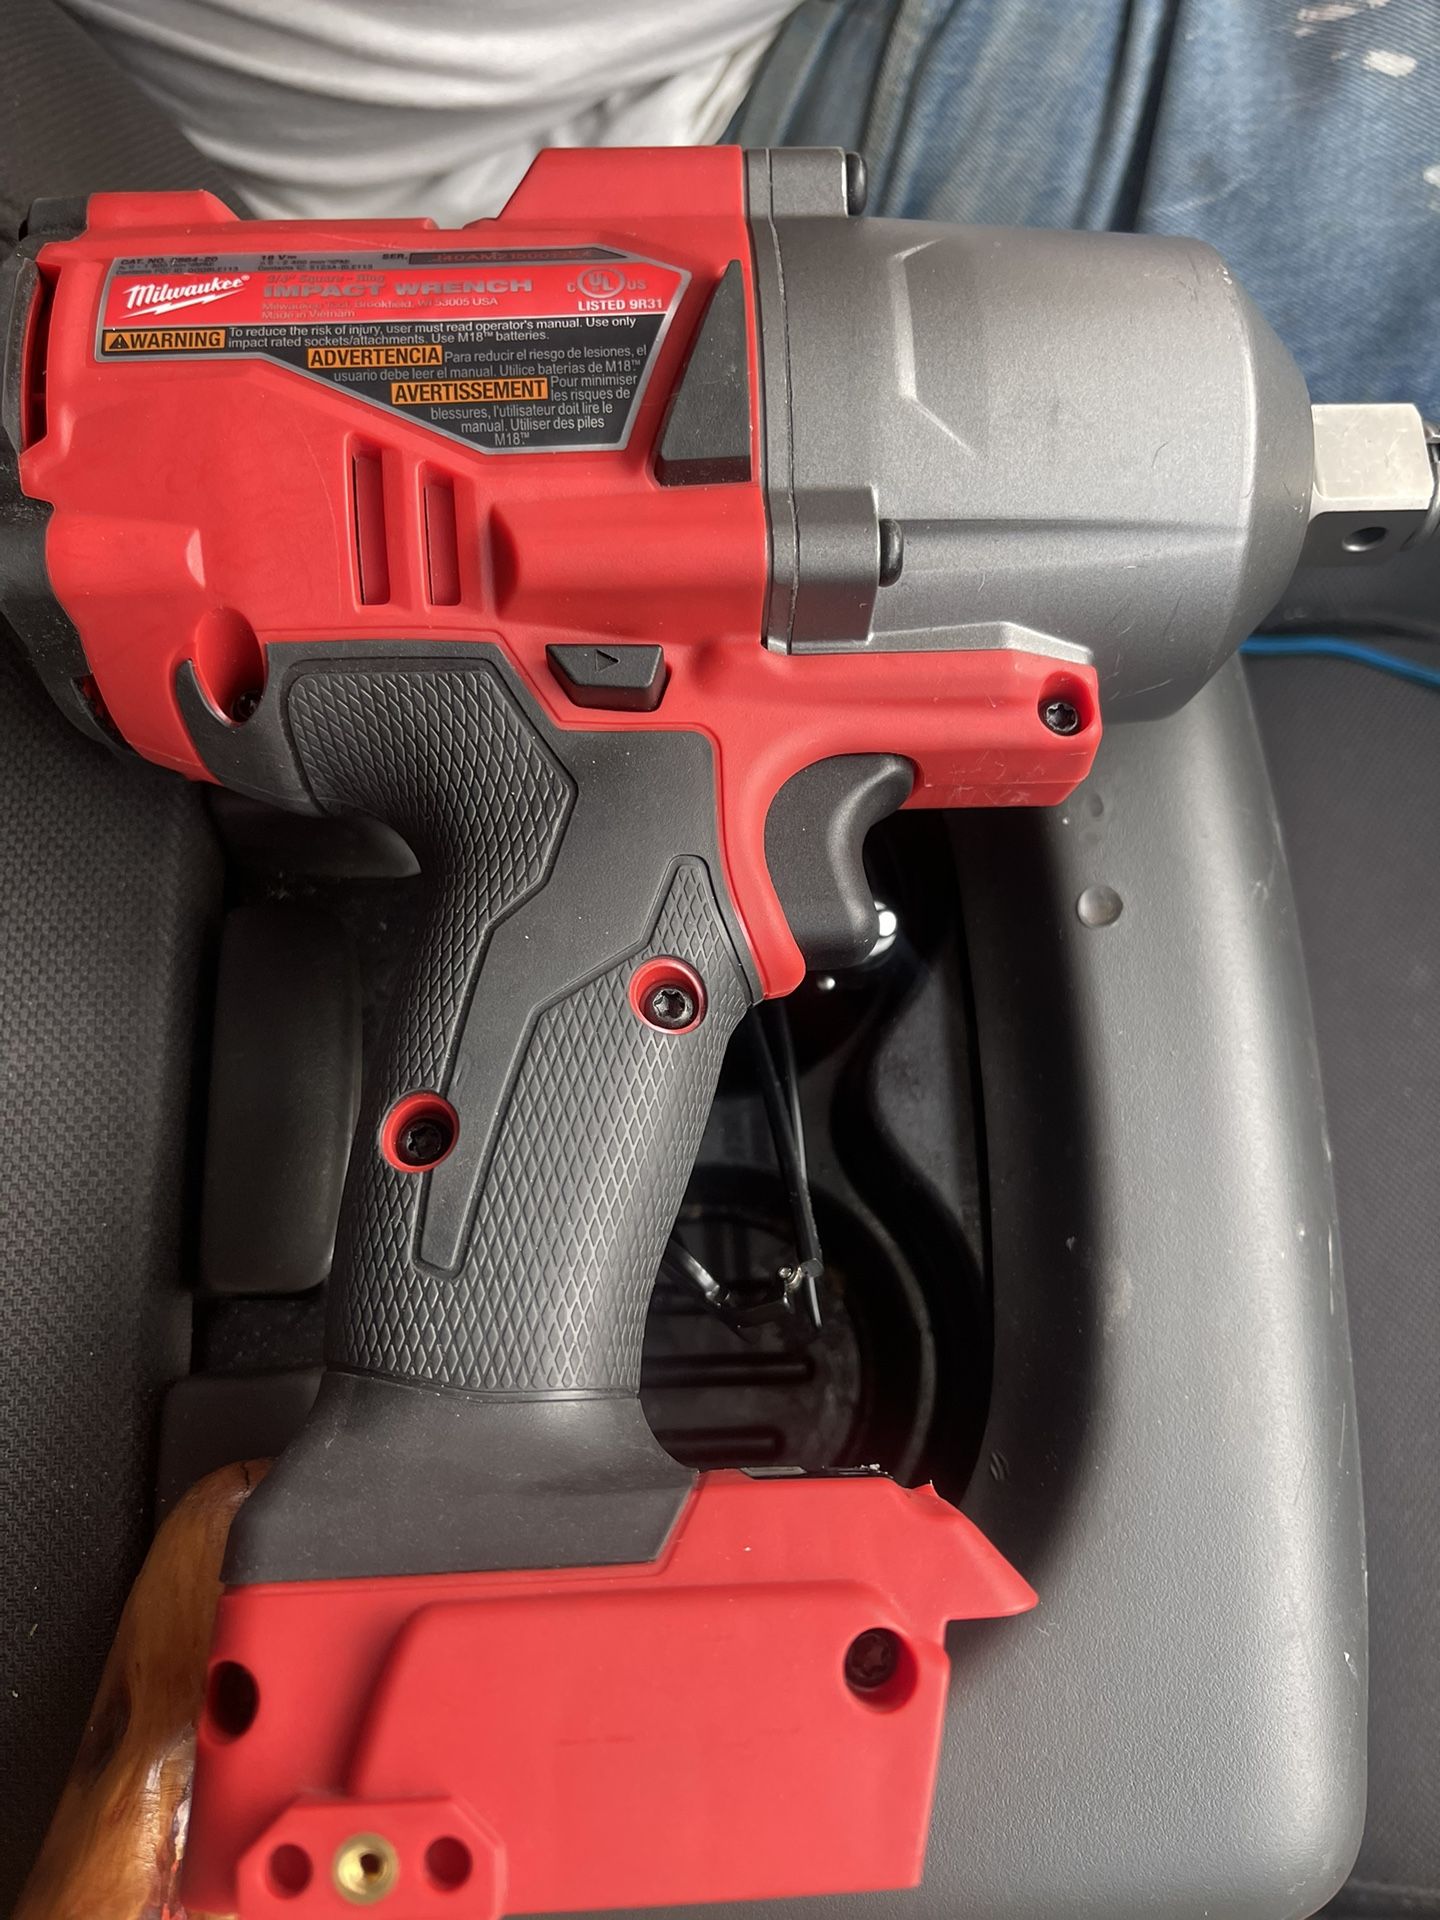 Milwaukee 3/4” Impact Wrench for Sale in Saint Paul, MN - OfferUp